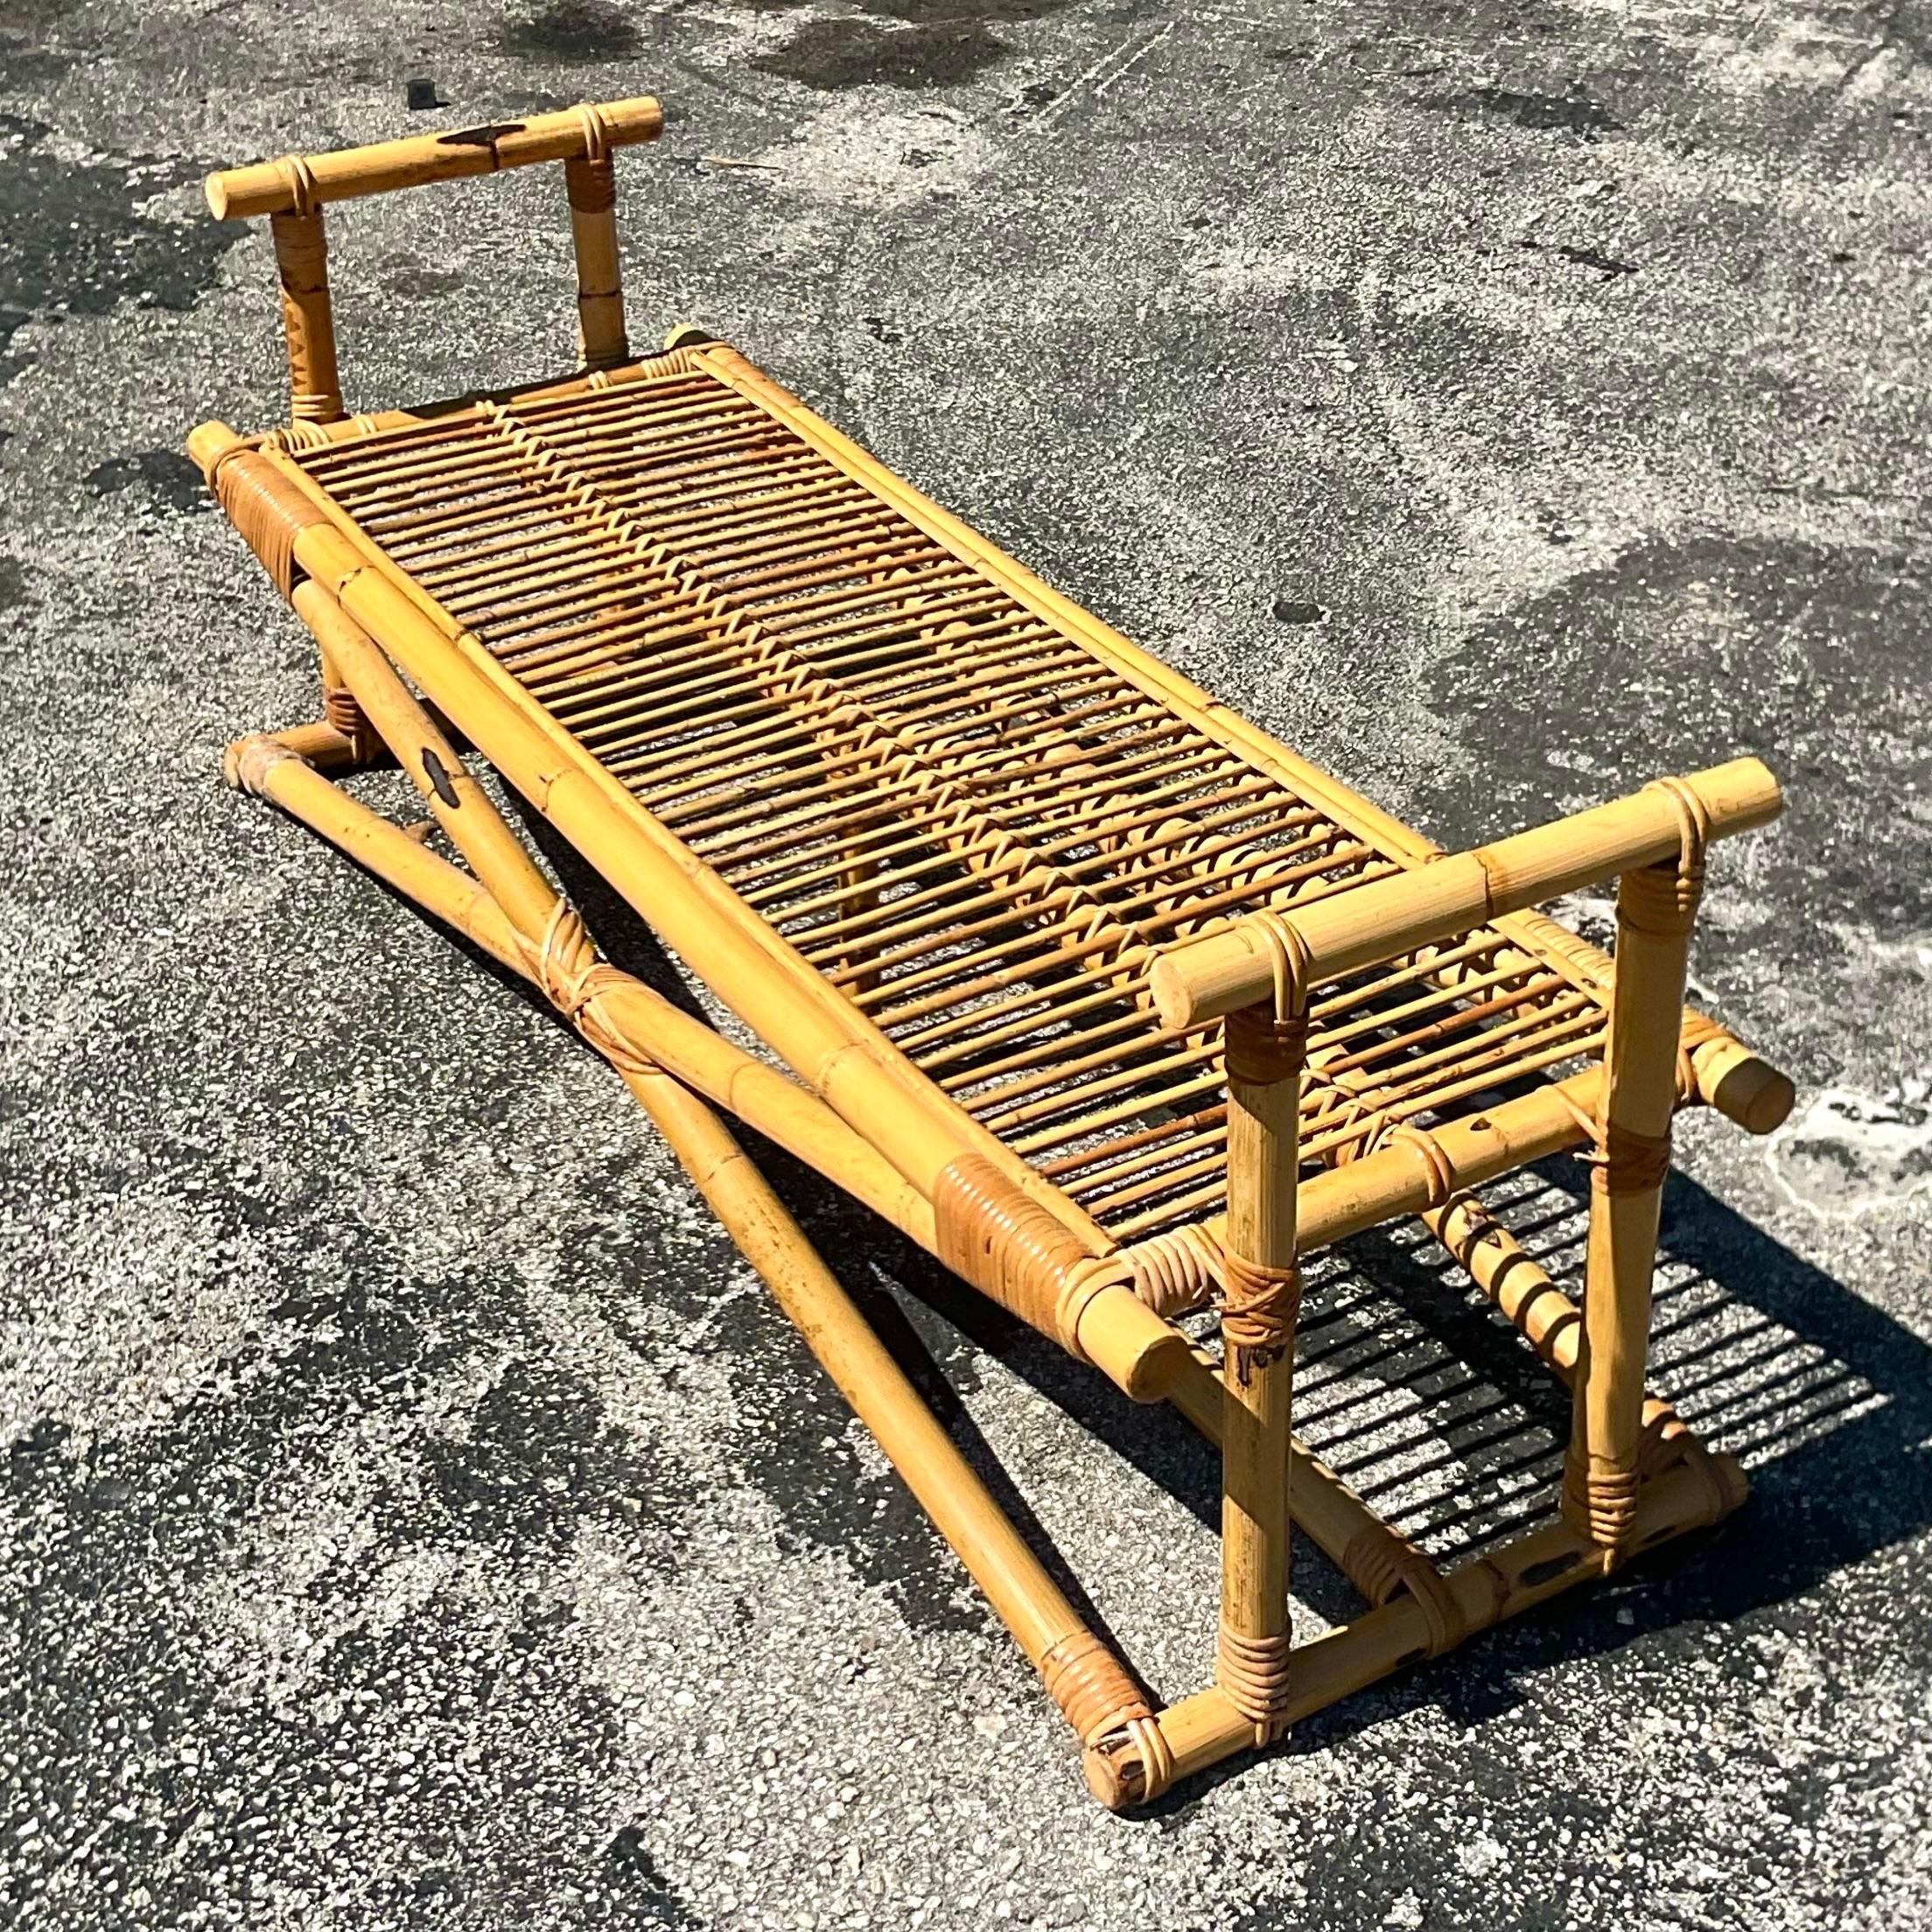 A very chic vintage coastal rattan bench. Perfect for many uses. End of your bed, entry hall or additional outdoor seating. You decide! Acquired at a Palm Beach estate.